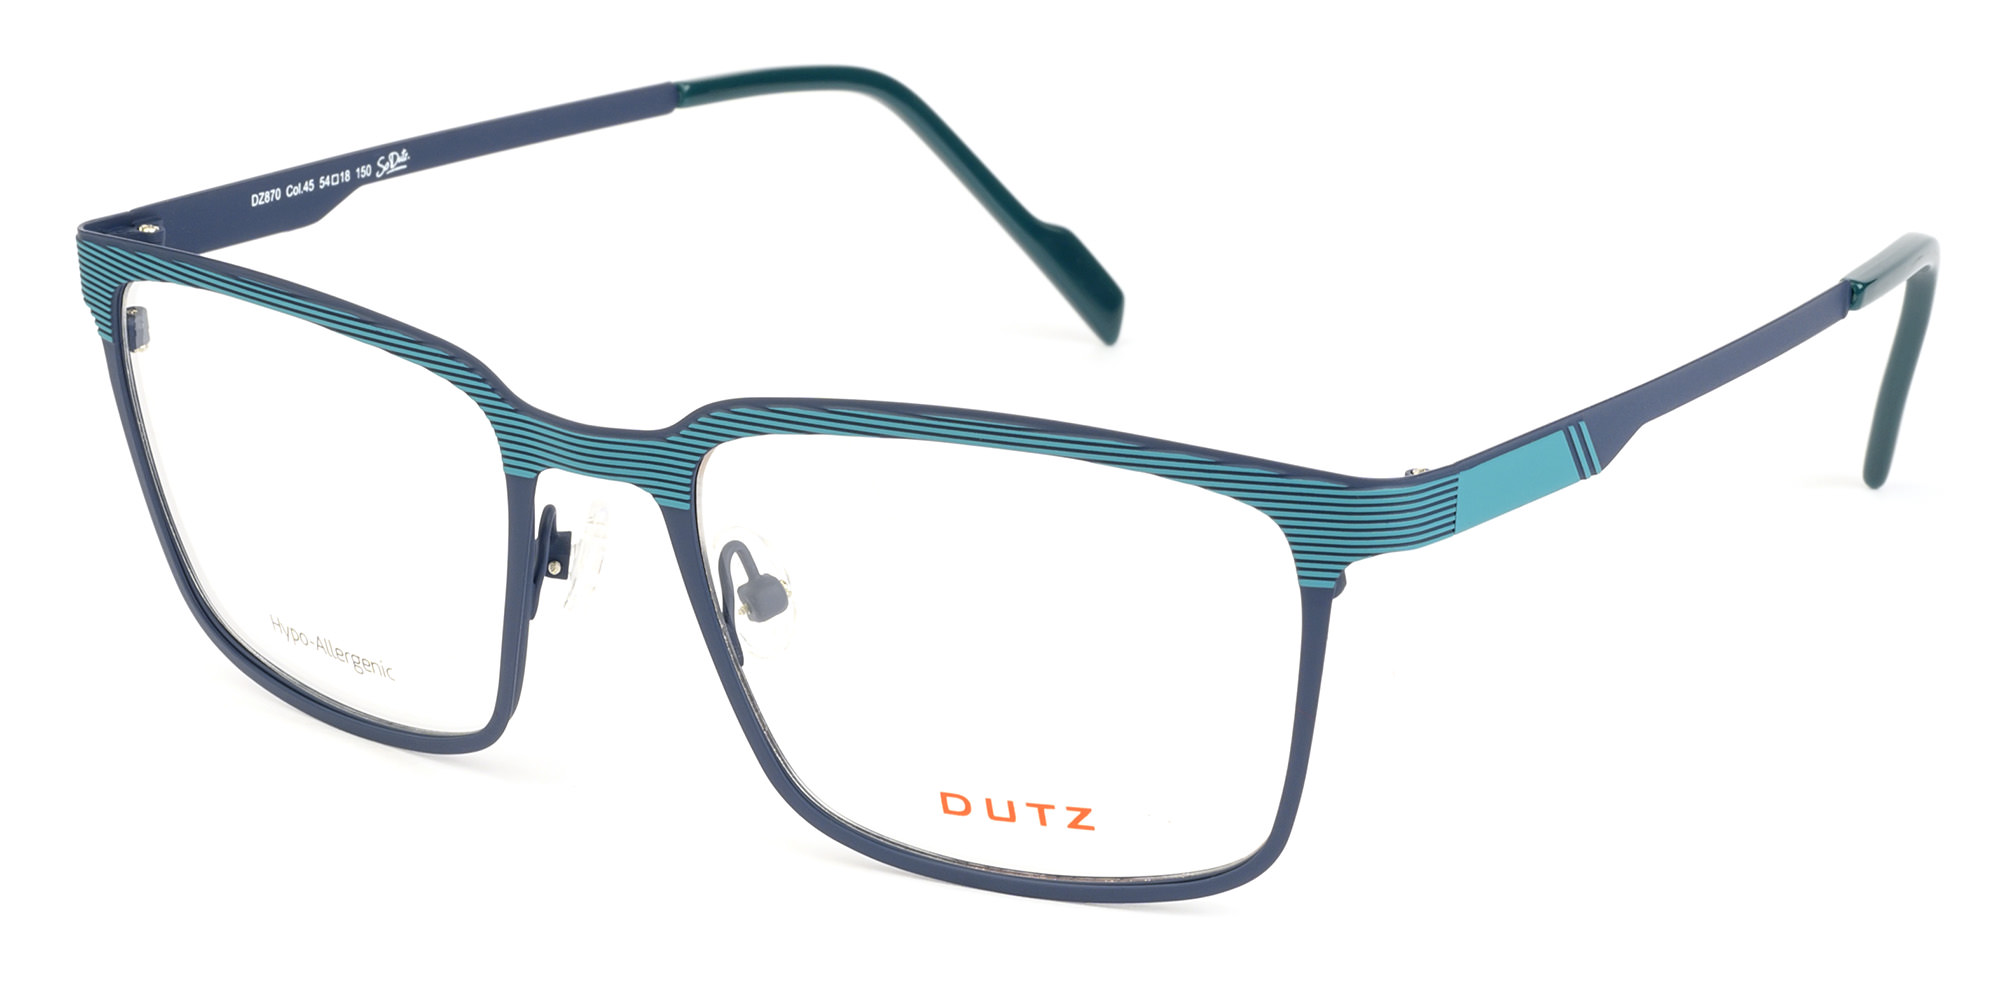 Men's, rectangular, bicolor, blue combined with petrol blue, metallic frame and temples, with assorted color acetate temple tips